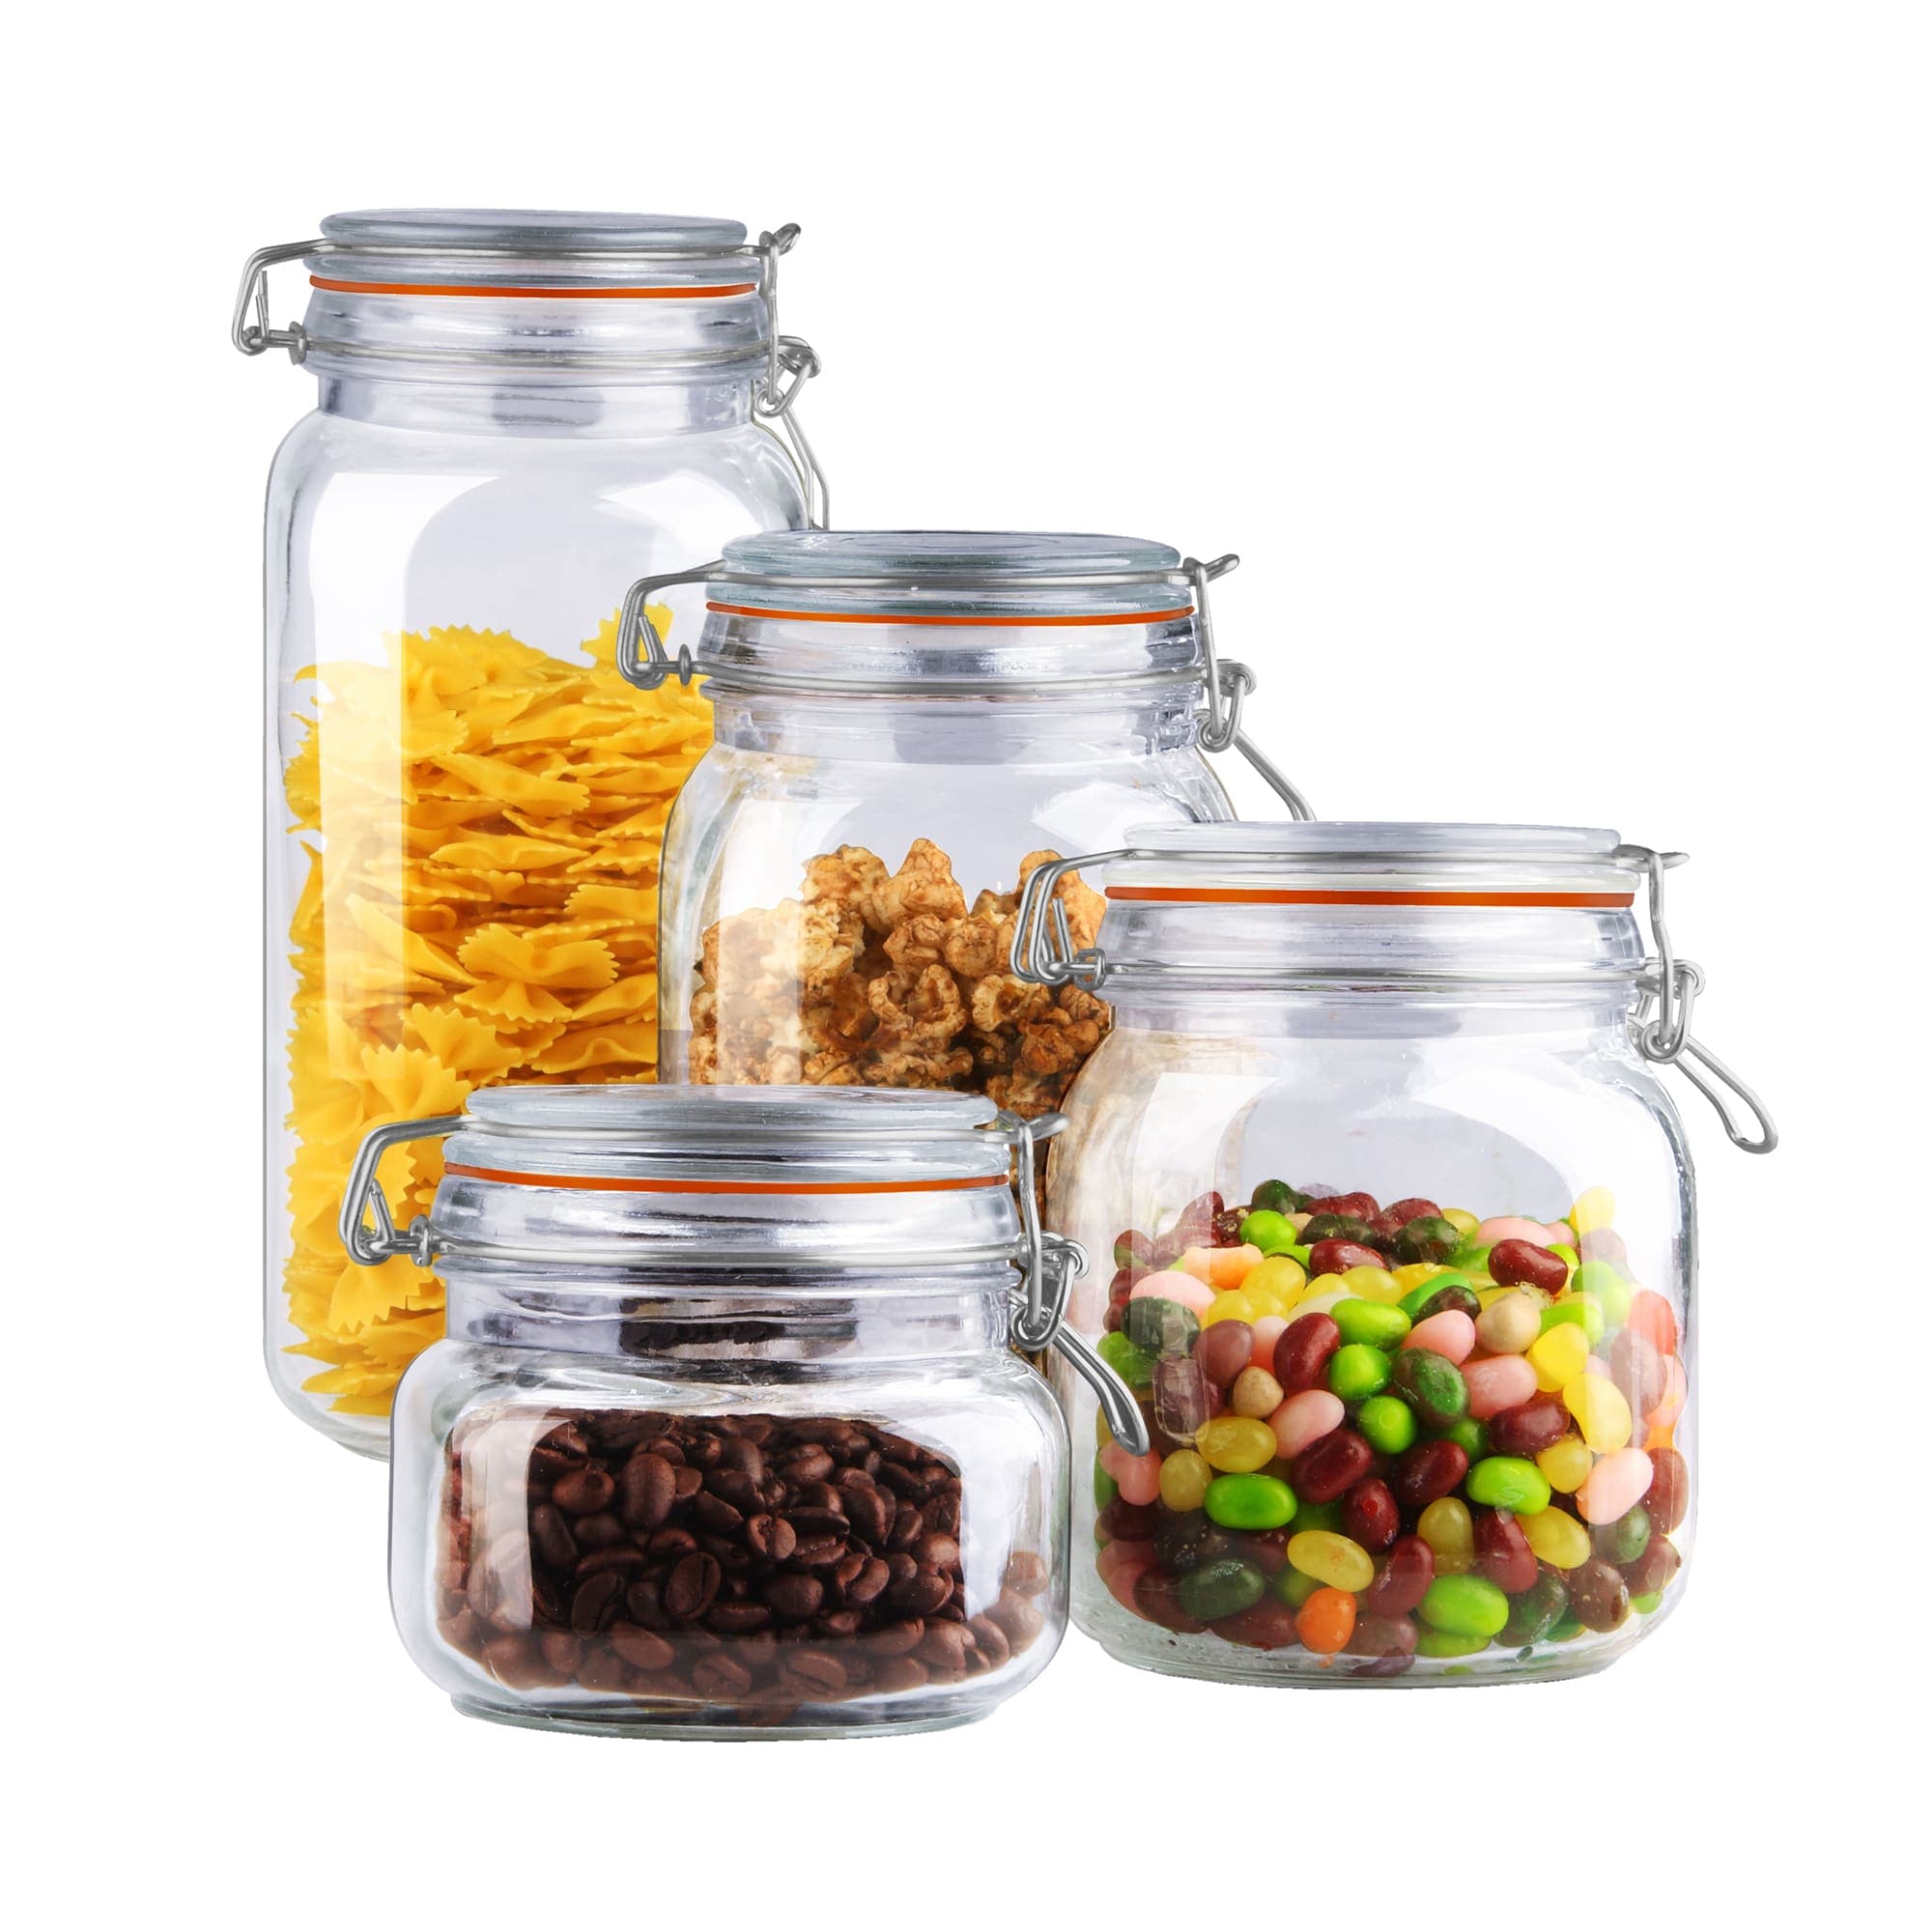 Home Basics Fleur De Lis Clear Glass Food Saver Storage Cookie Jar Canister  Container with Ceramic Lid (Medium)